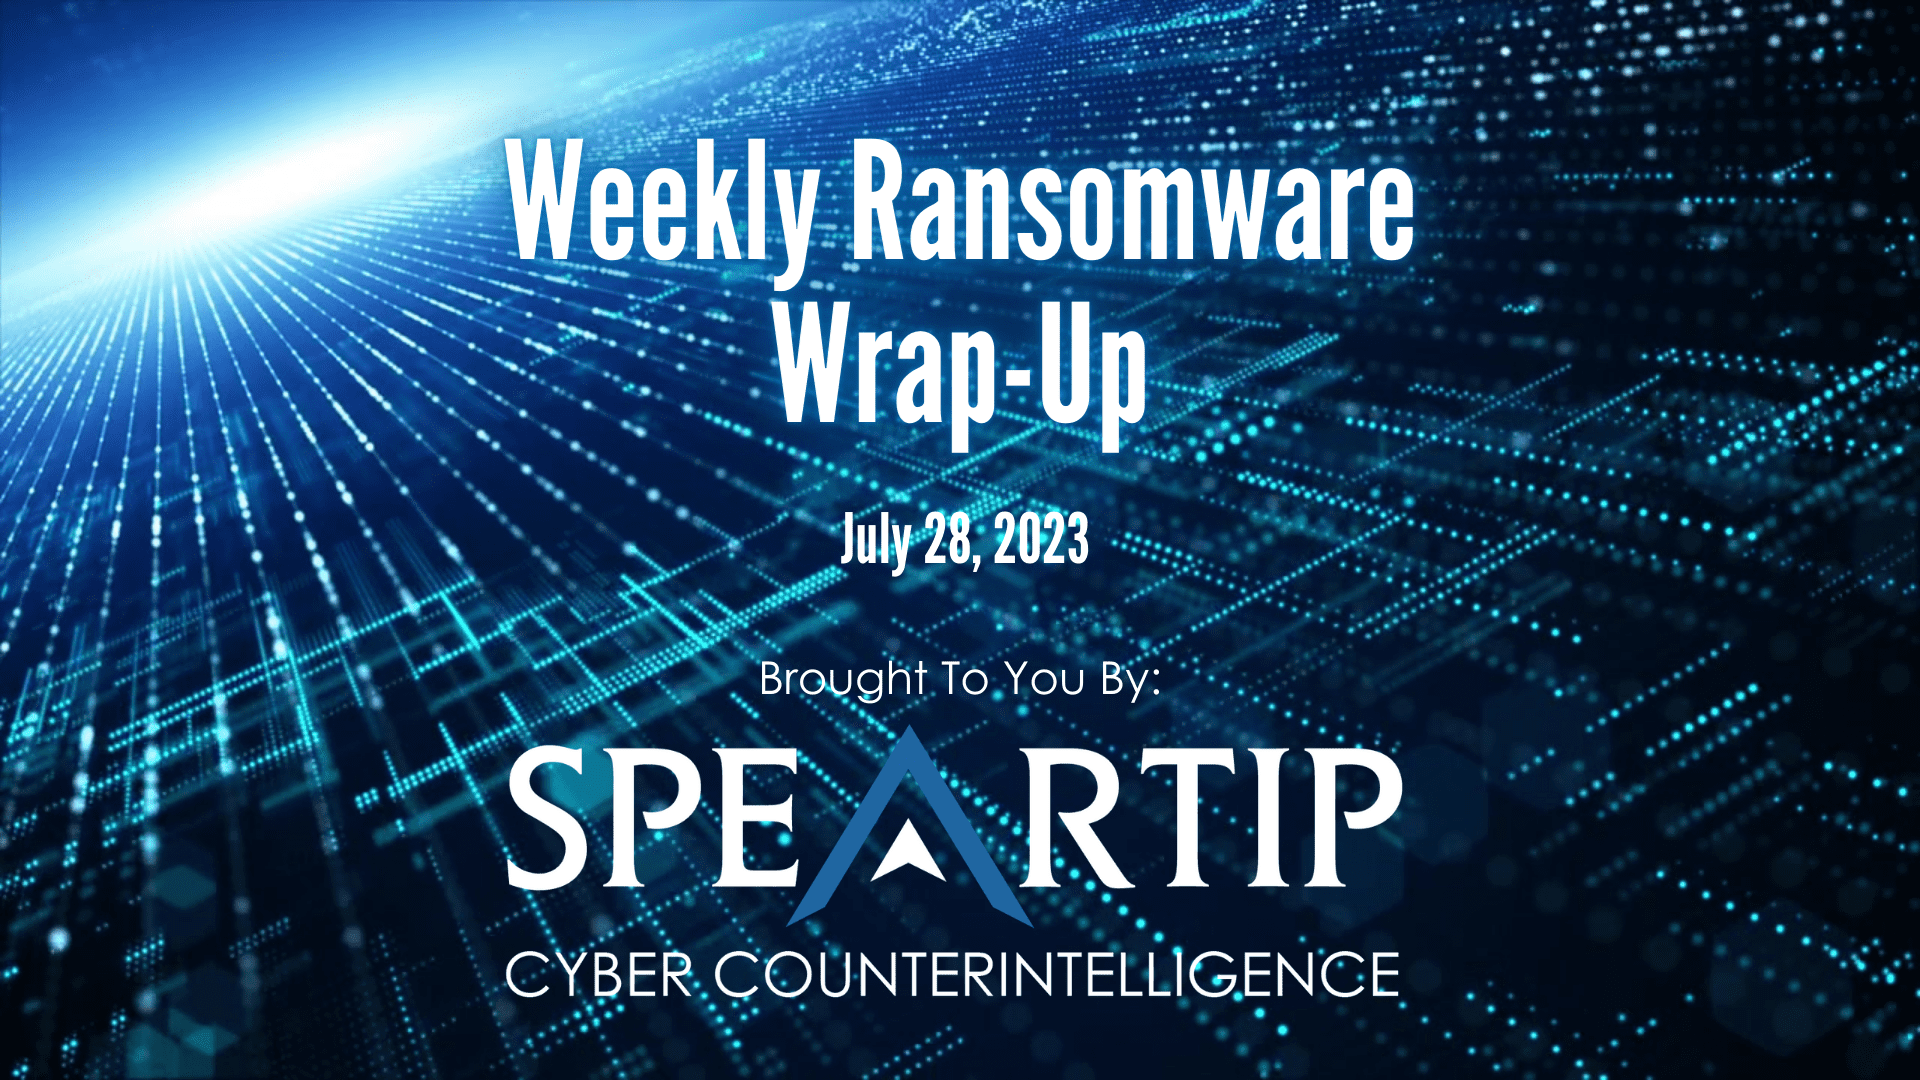 July-28-2023-Weekly Ransomware Wrap-up